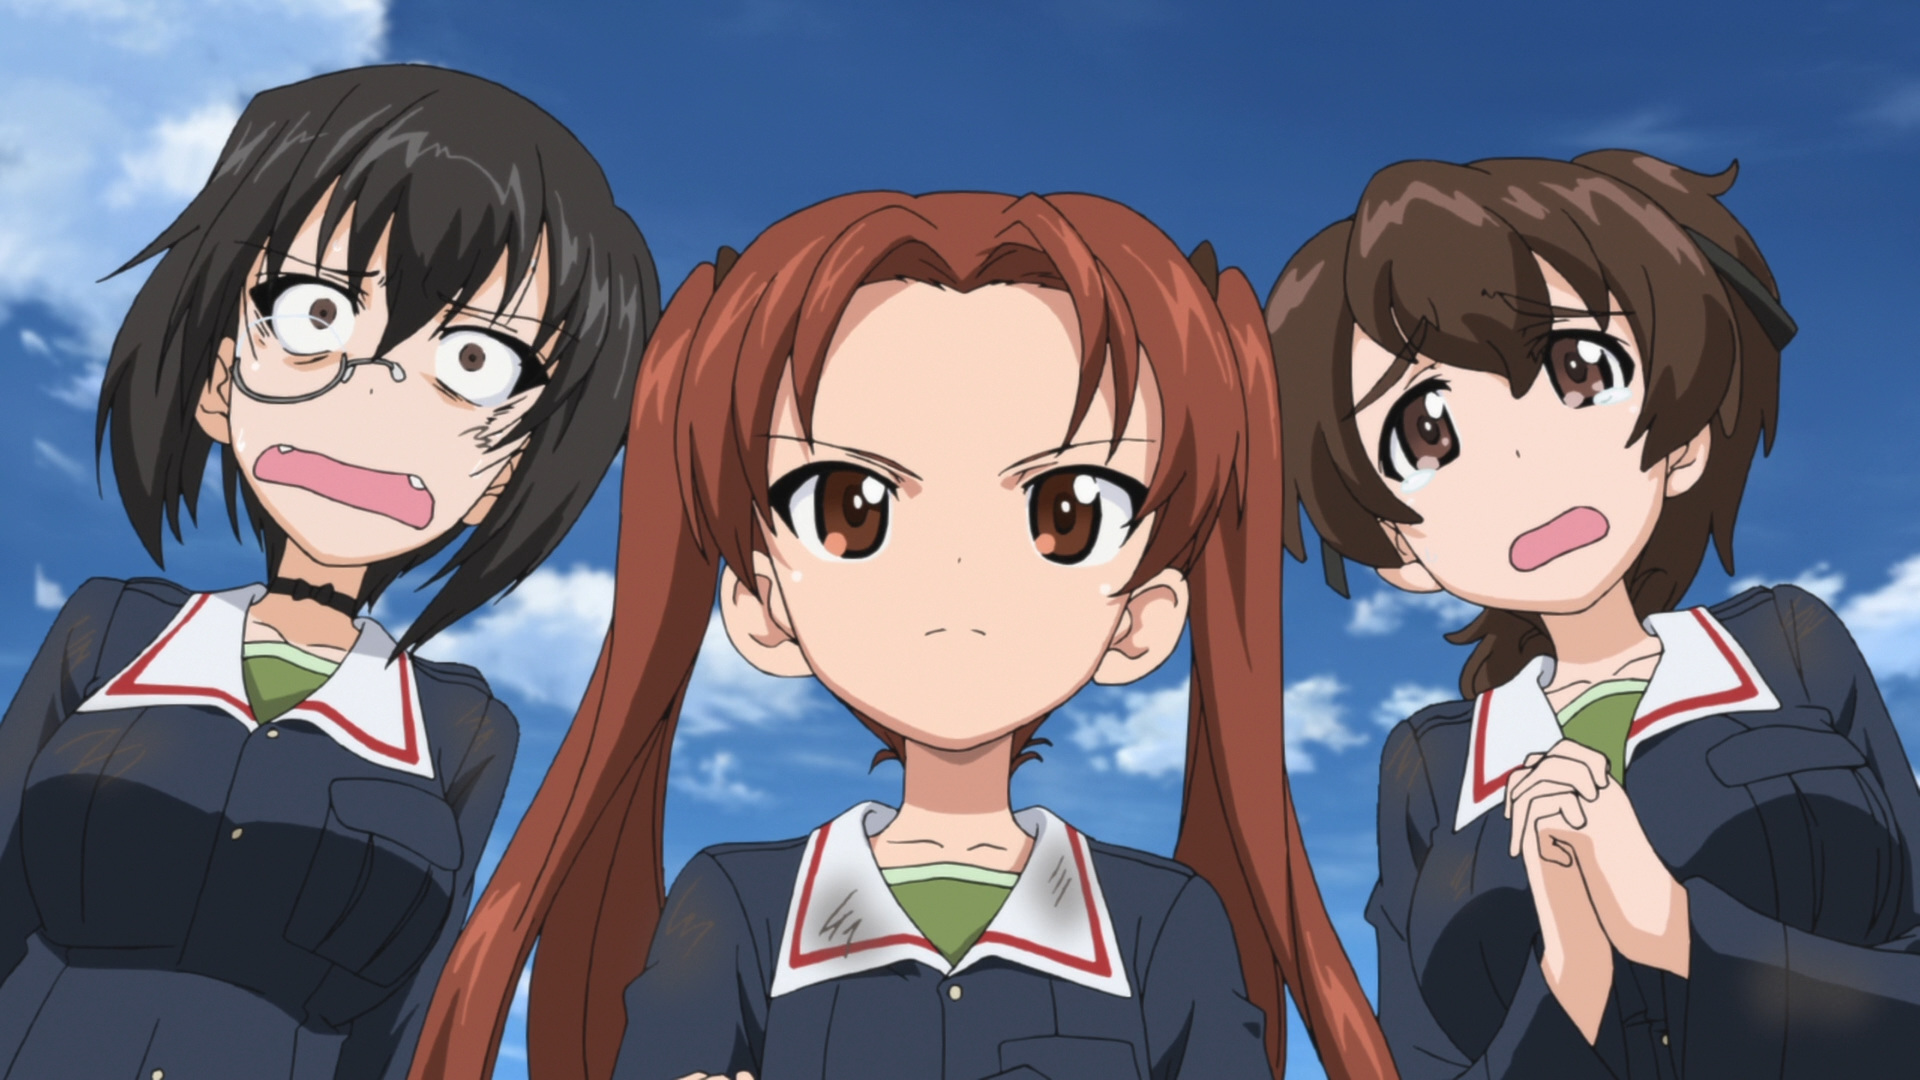 I proudly award Girls und Panzer with an overall score of 9. As long as you...